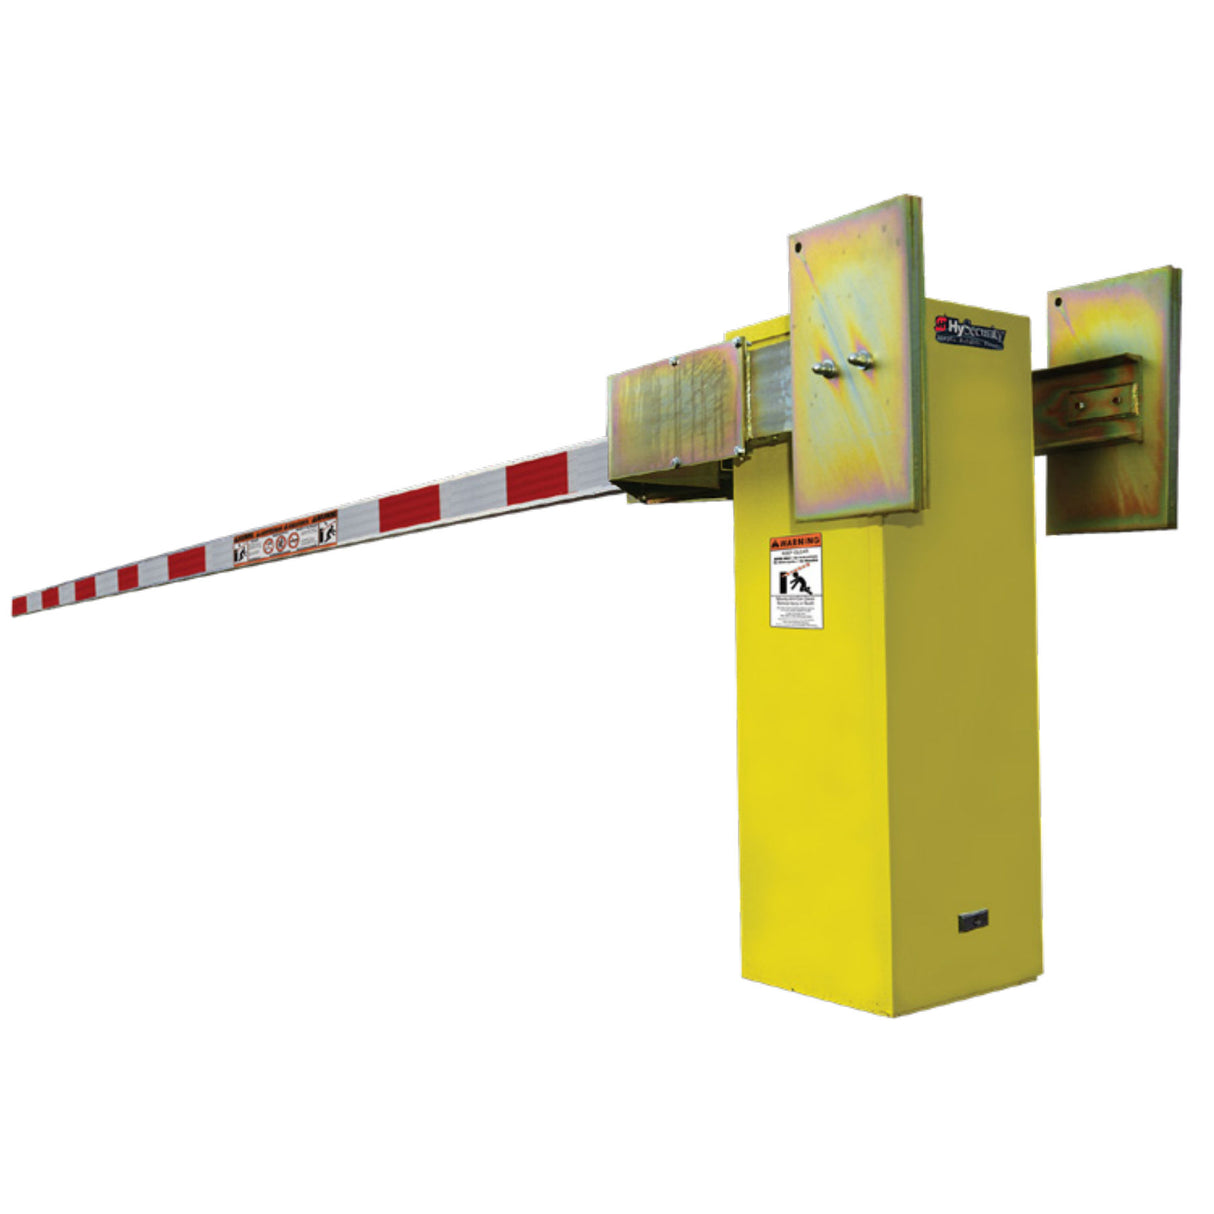 Hysecurity STRONGARM 20 Barrier Gate Opener